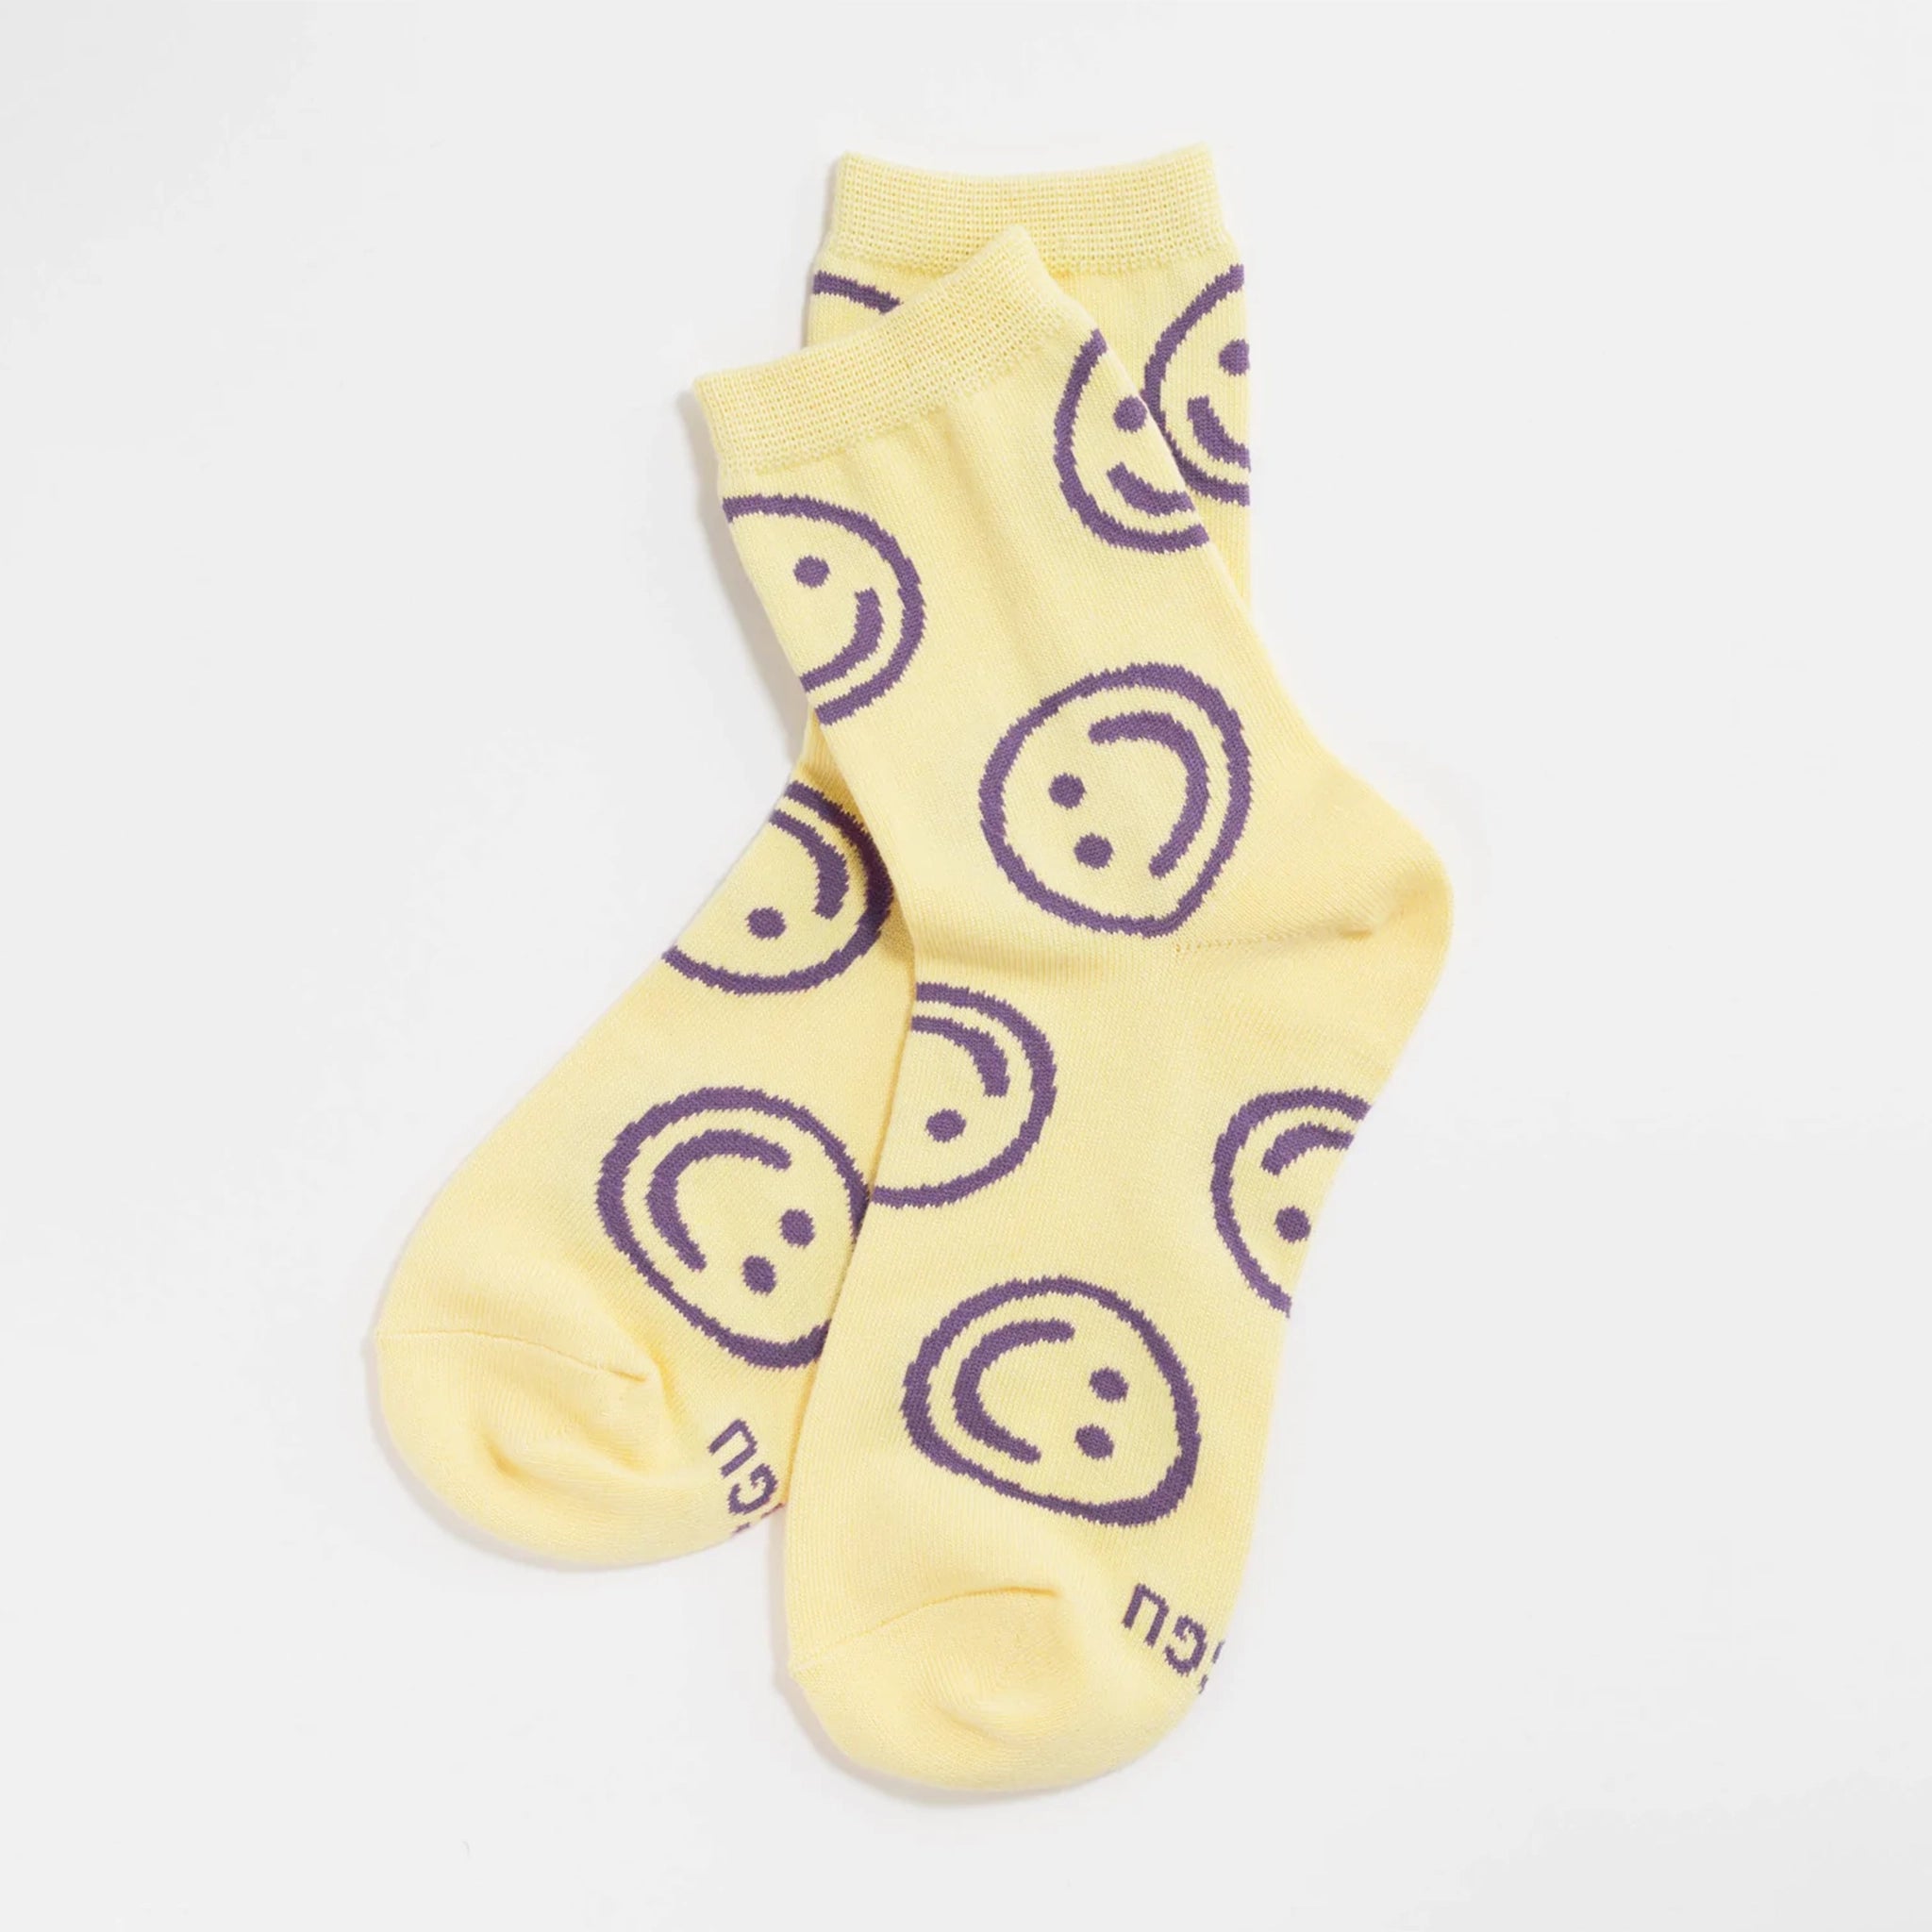 Light yellow crew socks with a repeating  purple smiley face design all over.